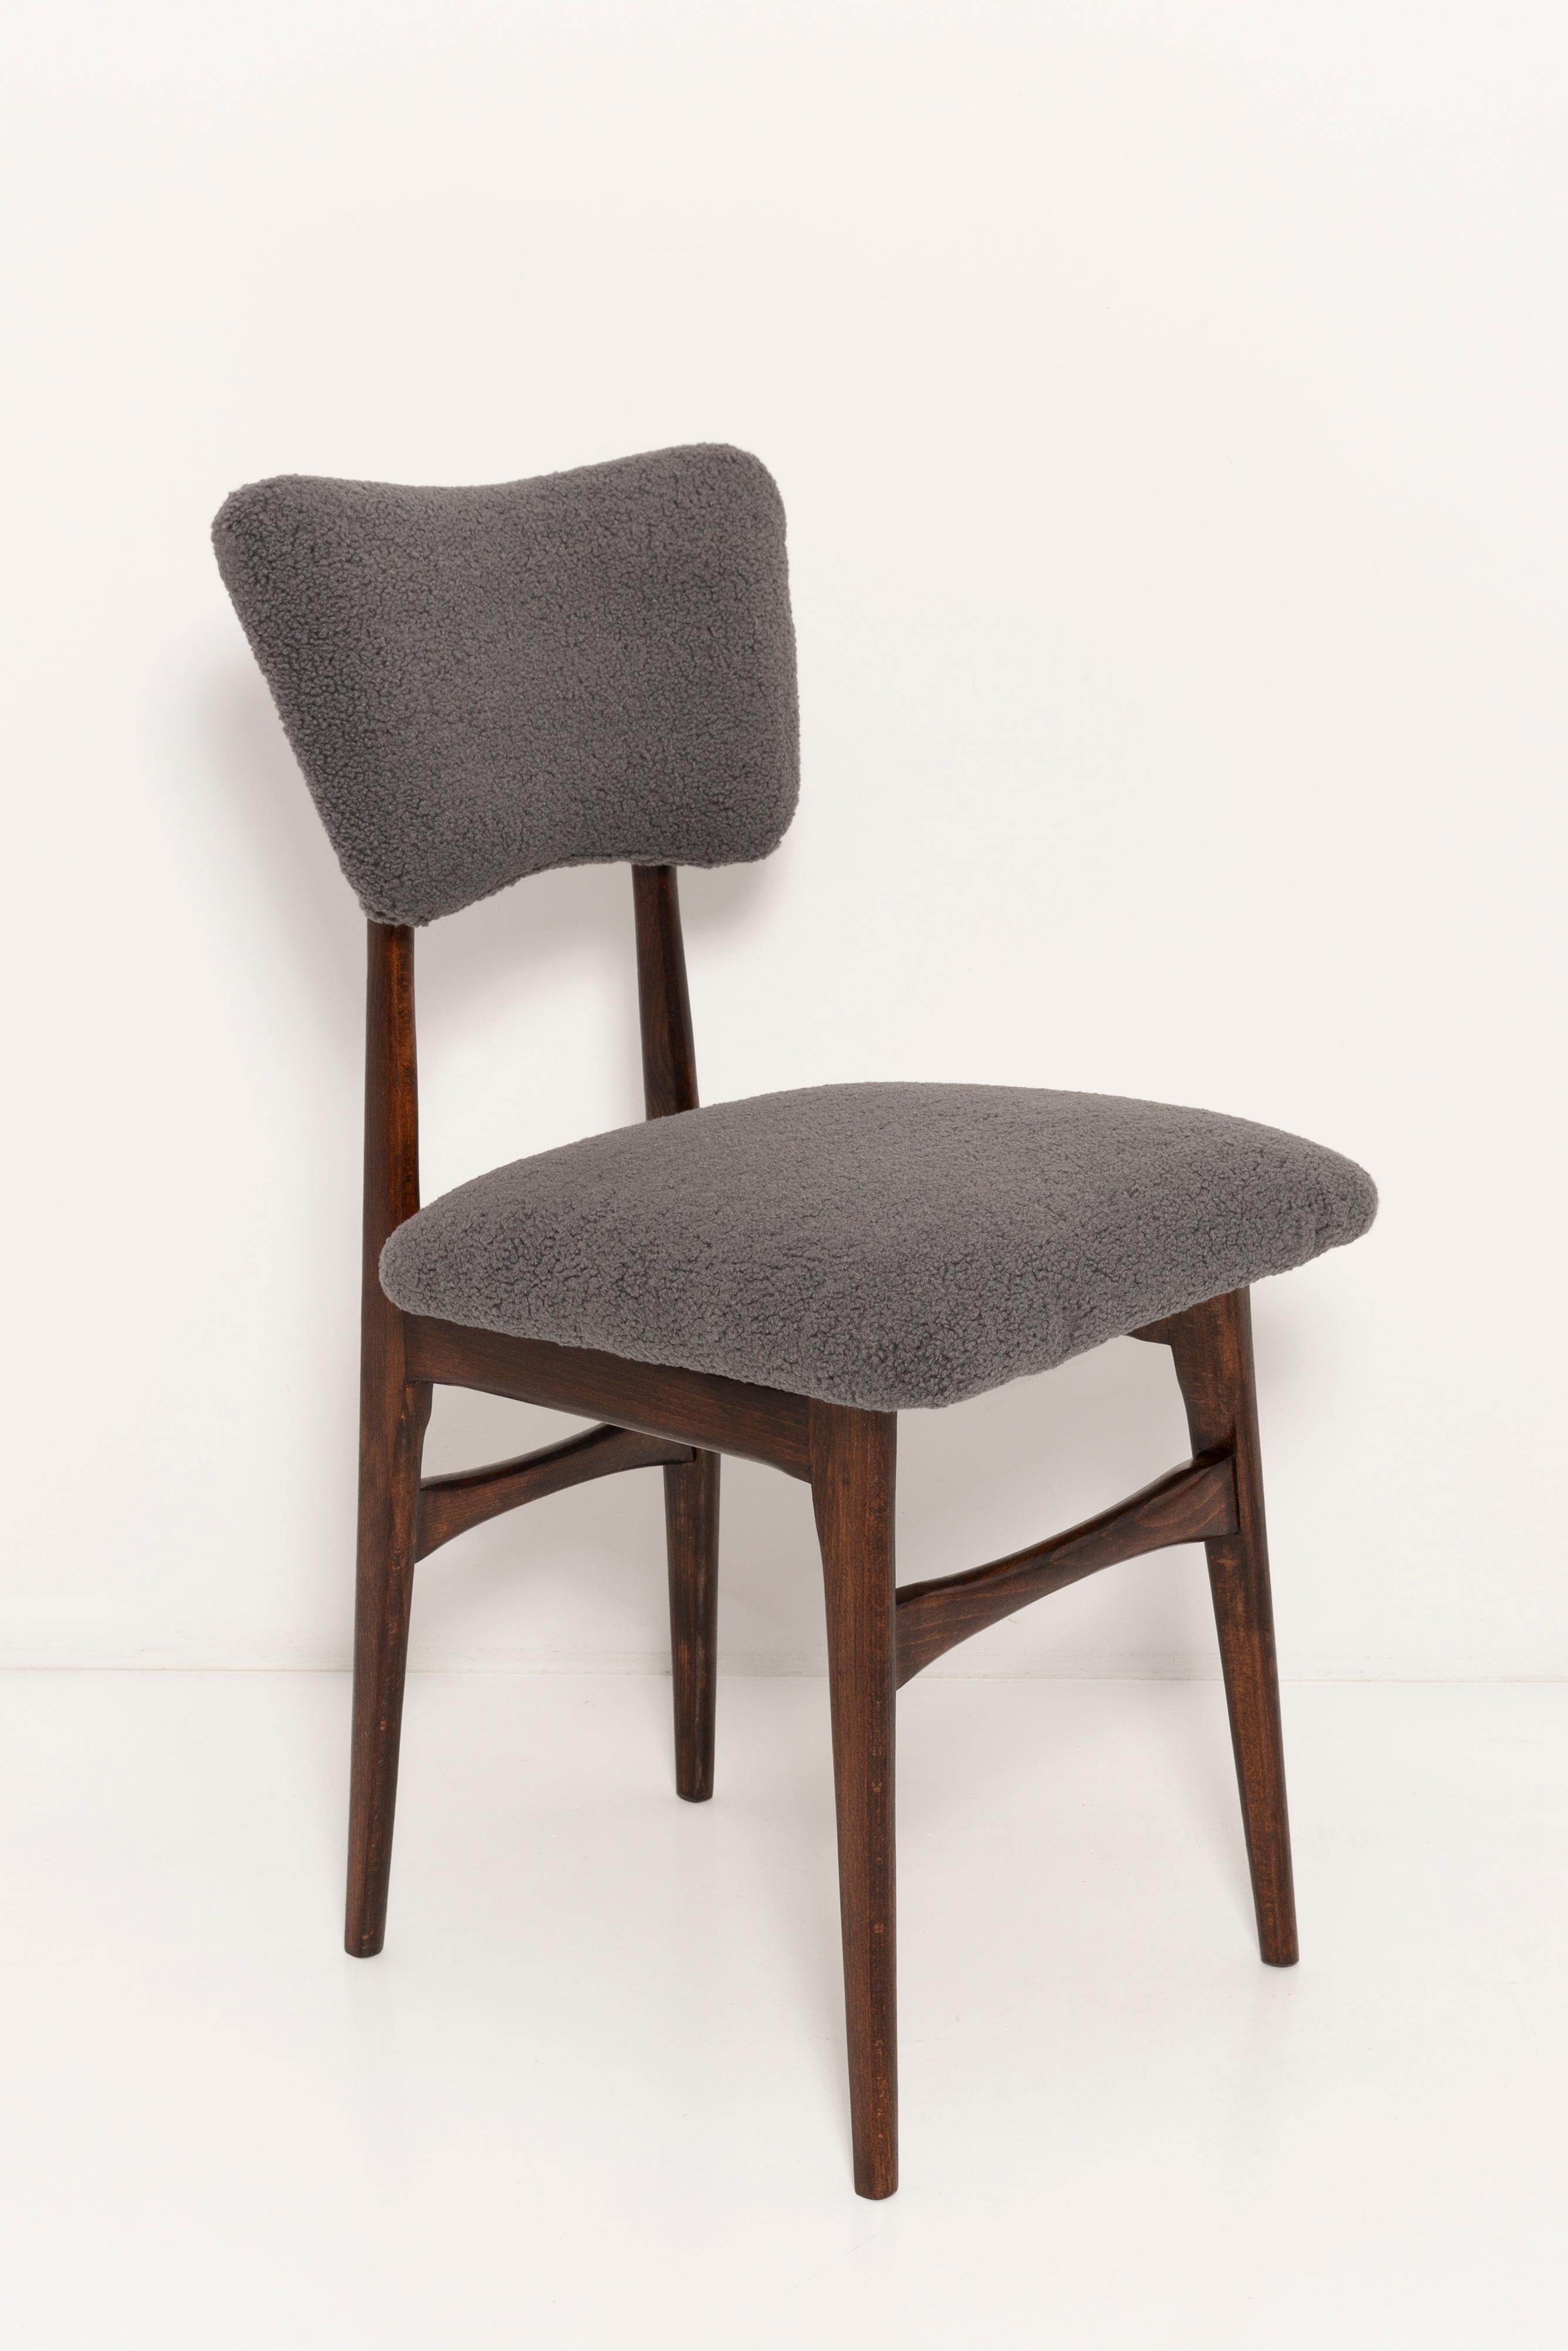 Chairs designed by Prof. Rajmund Halas. Made of beechwood. Chairs are after a complete upholstery renovation, the woodwork has been refreshed. Seat and back is dressed in dark gray (color 07), durable and pleasant to the touch boucle fabric. Chairs